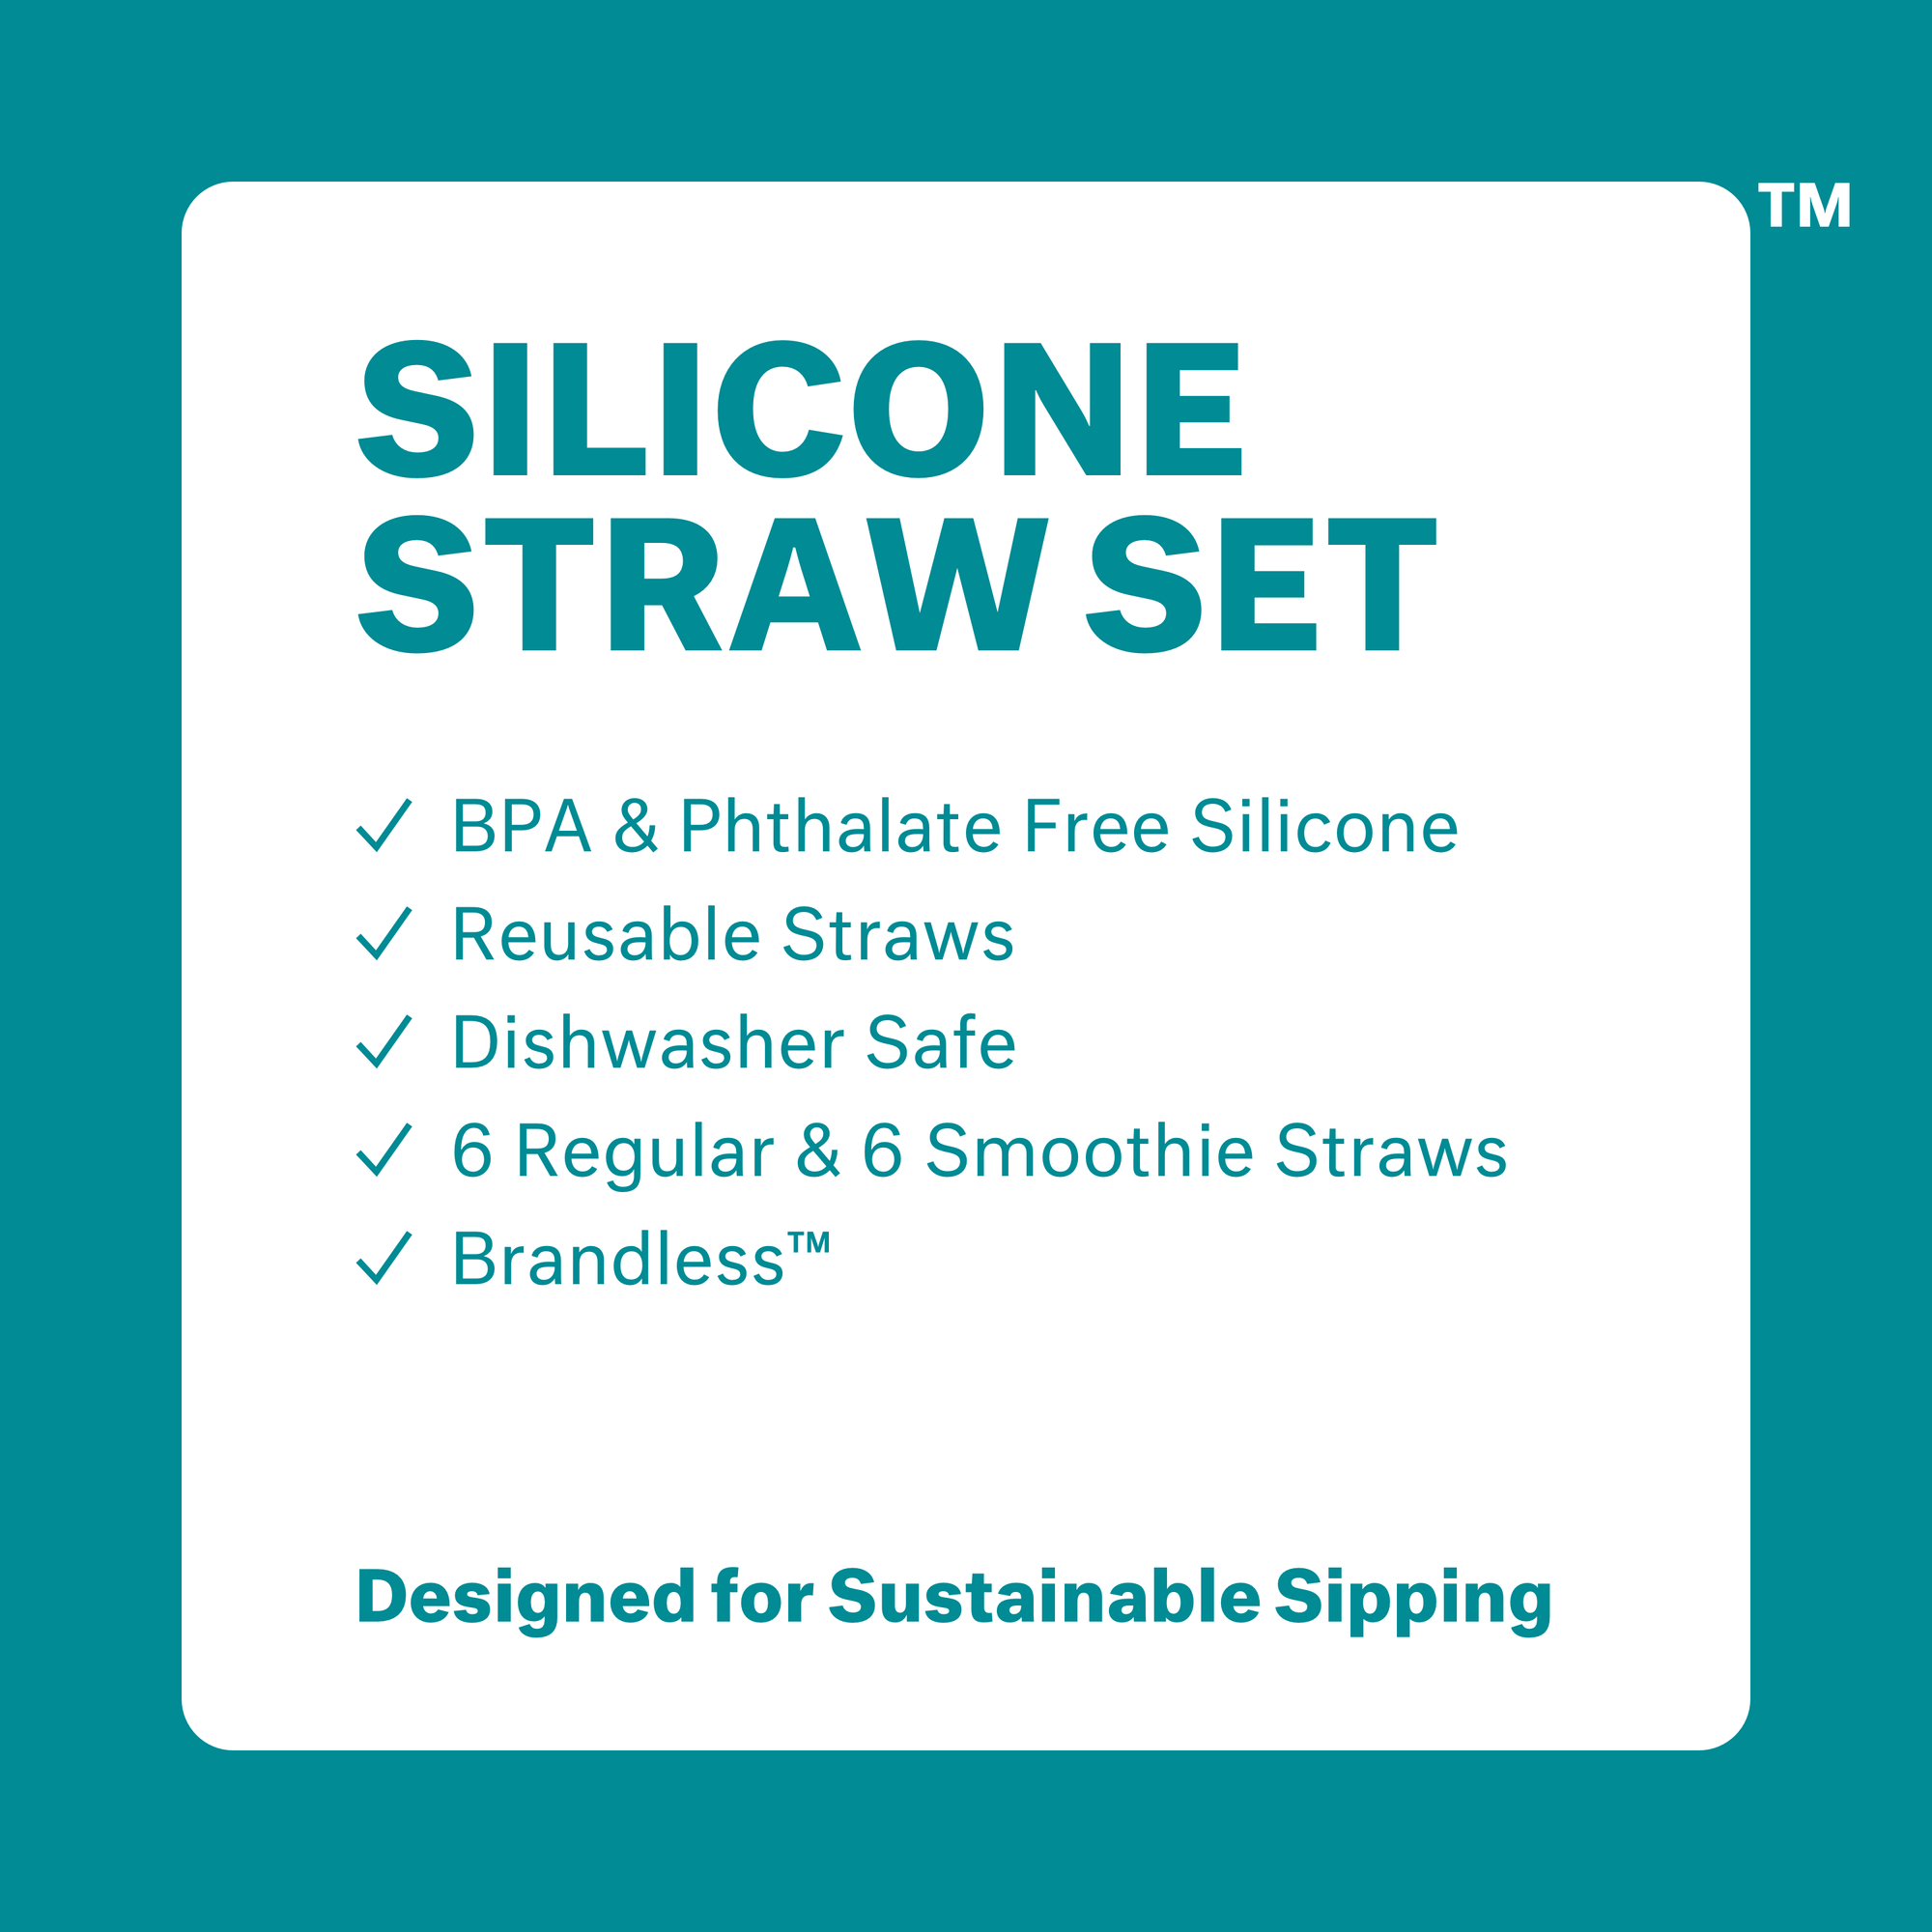 Product photo, all 12 straws and cleaning kit, side view.